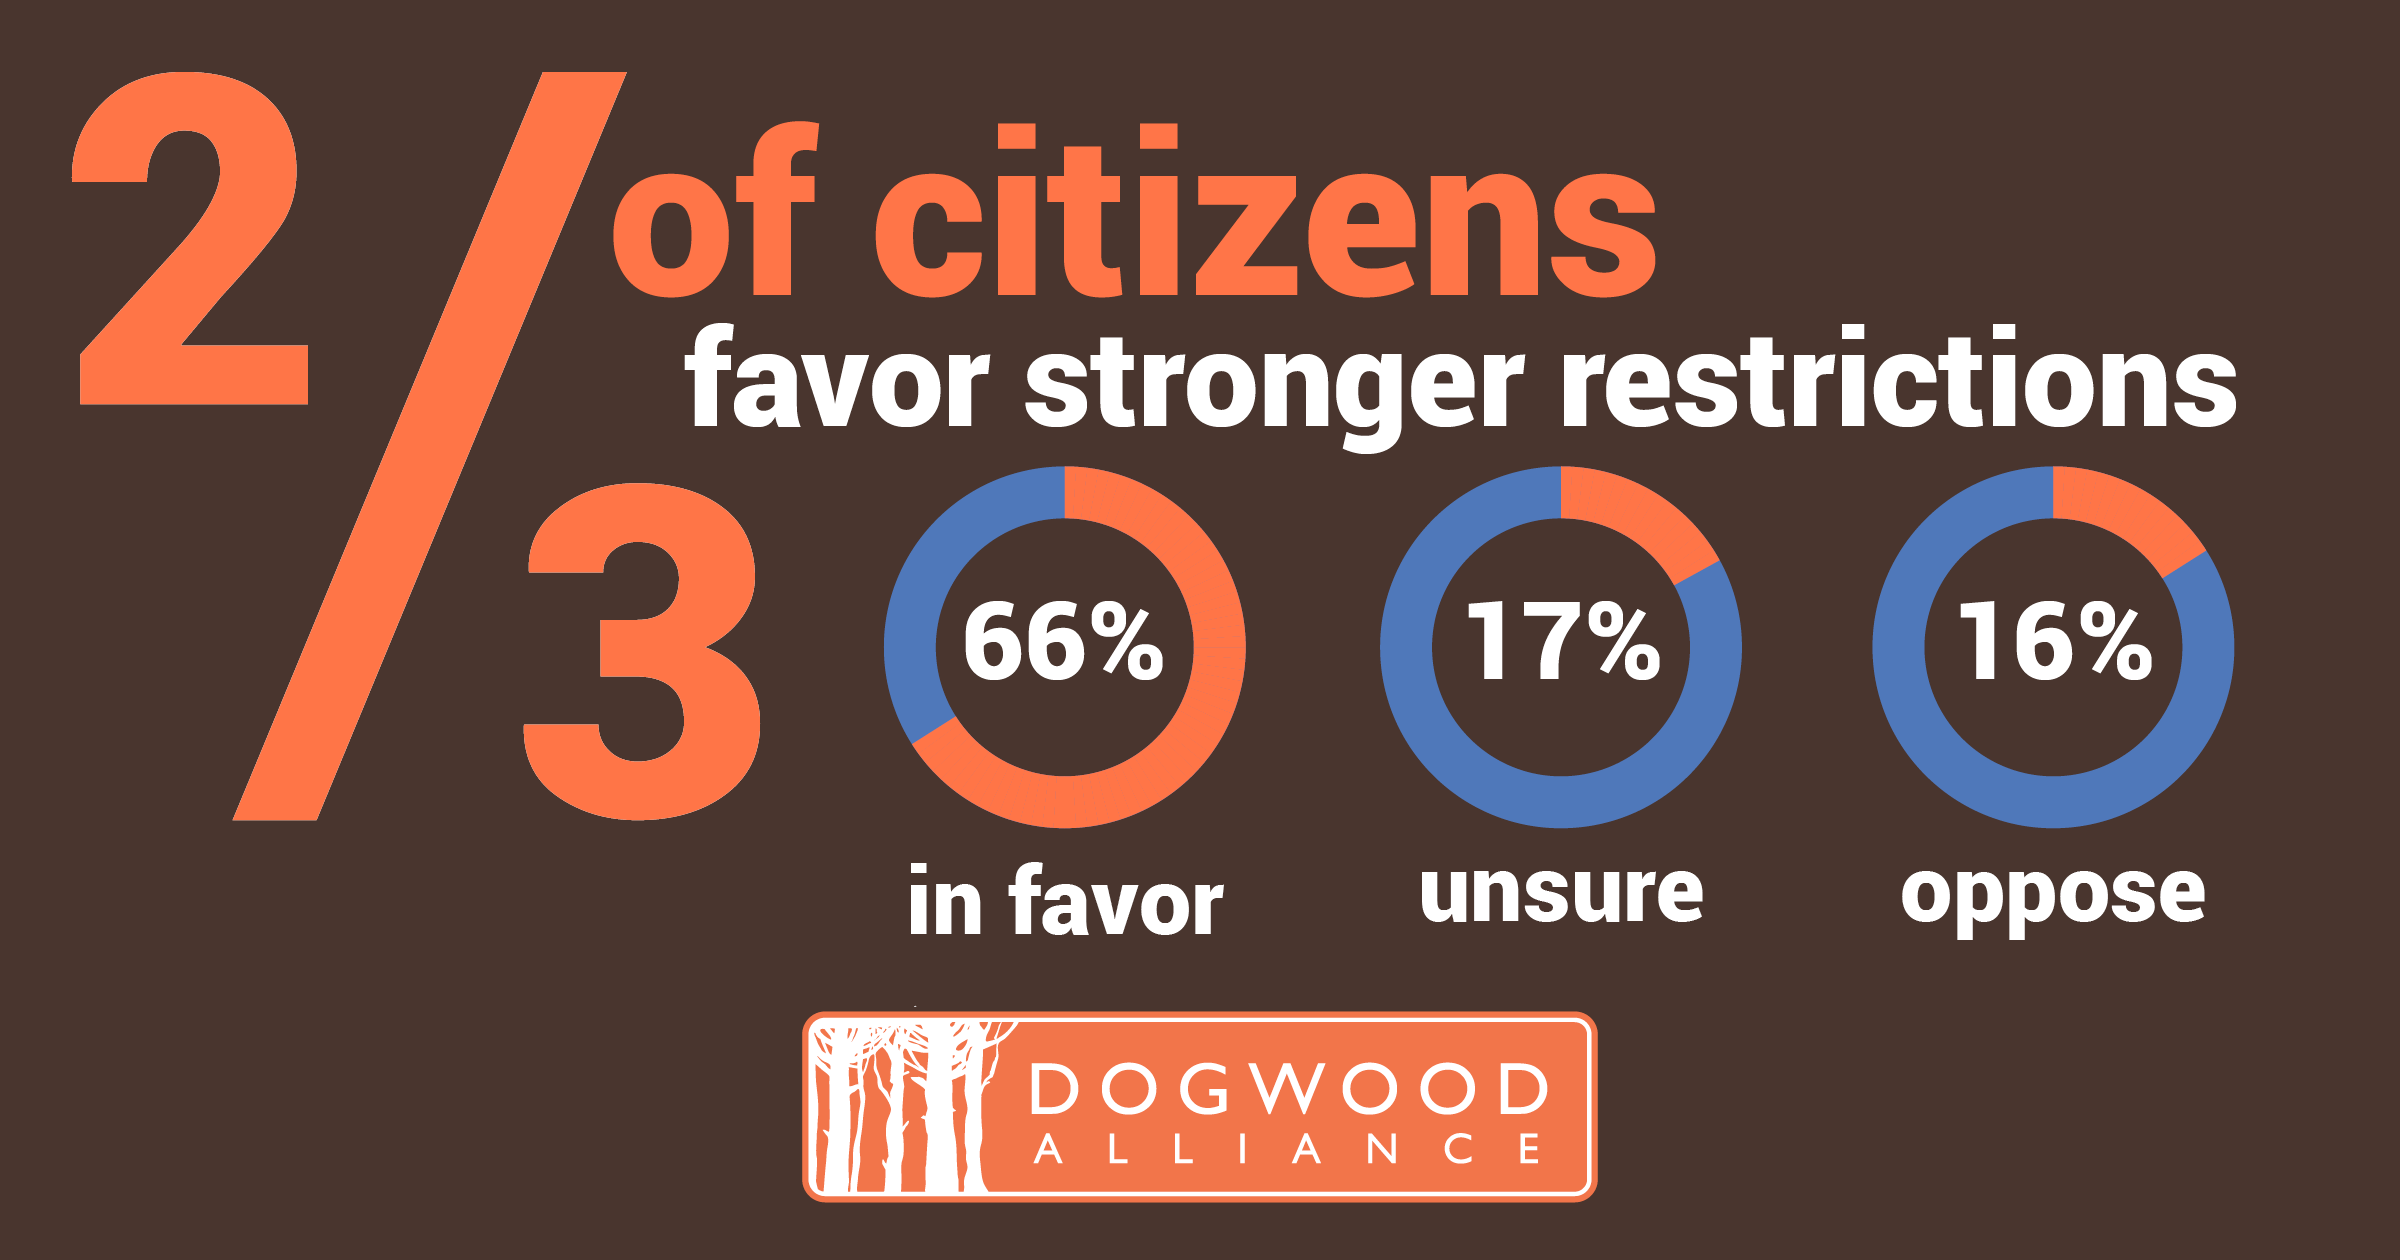 Two thirs of citizens favor stronger restrictions on the logging industry.